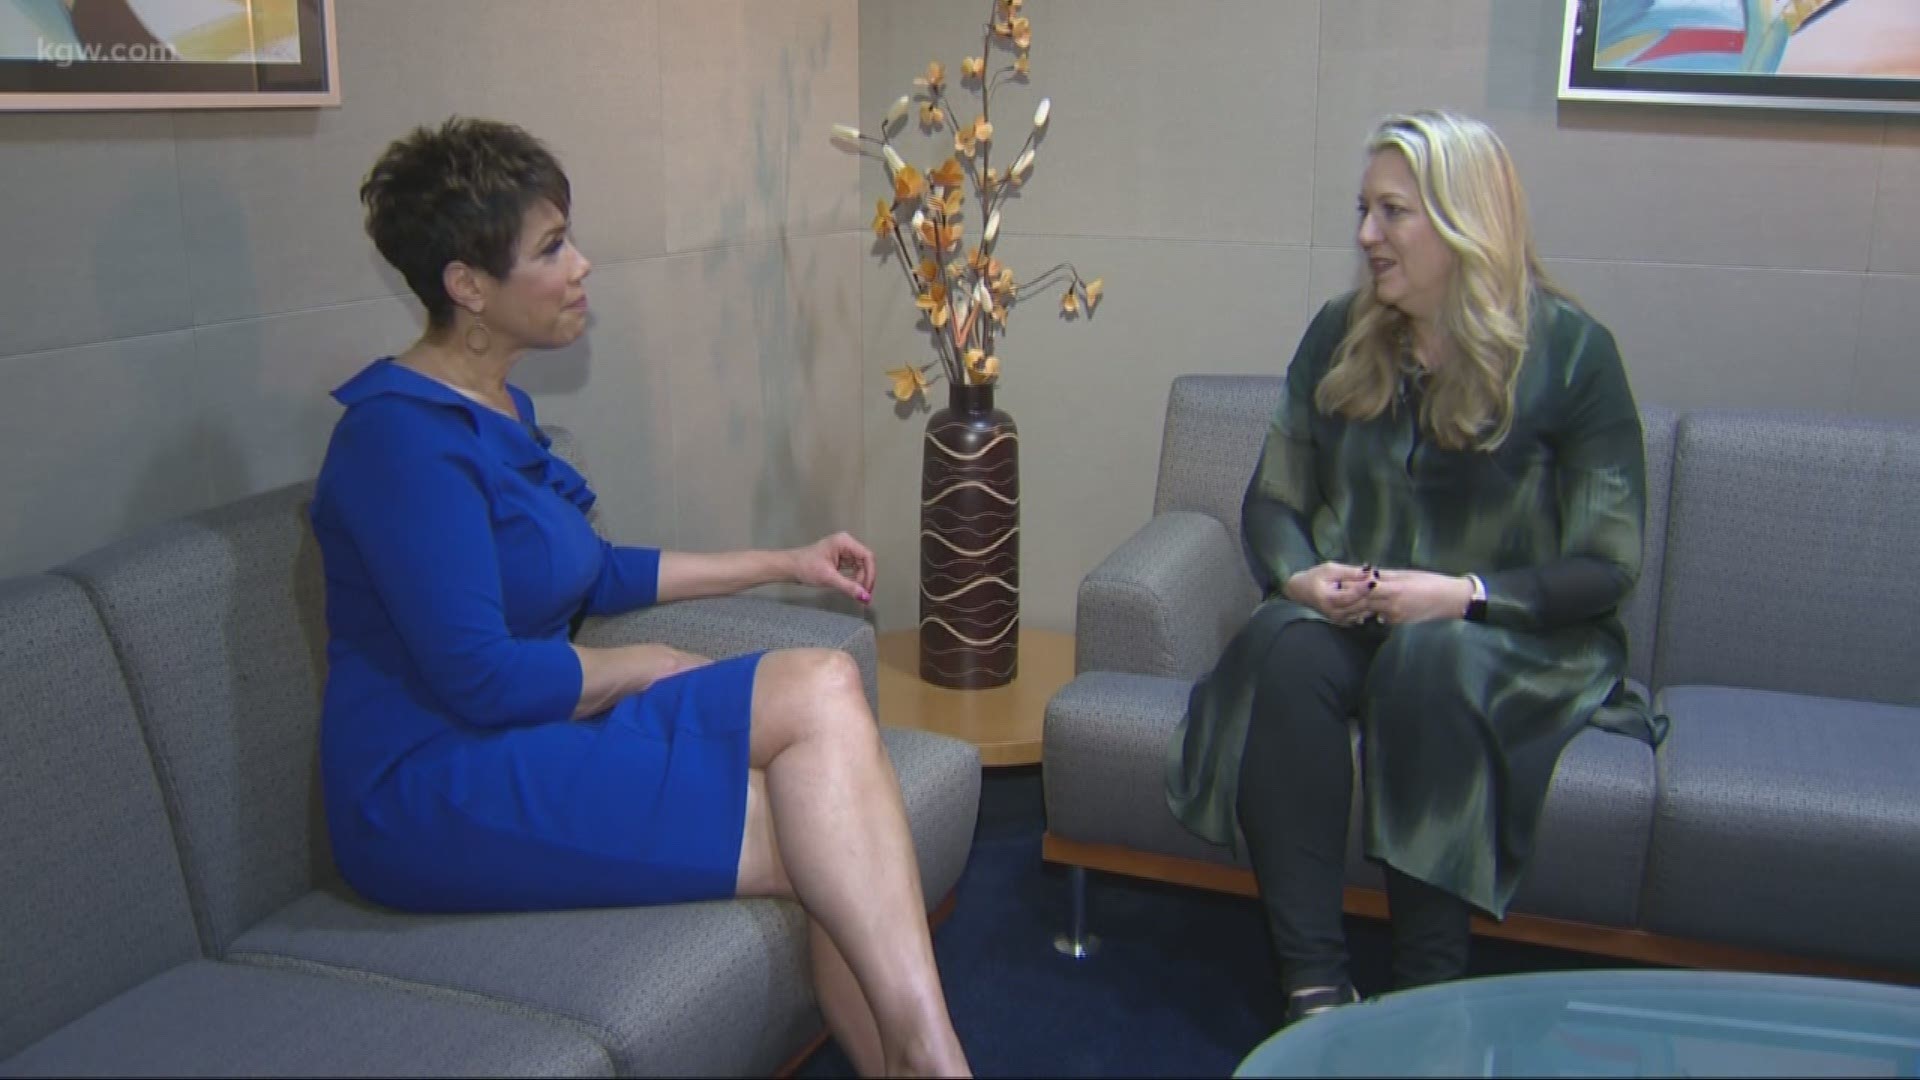 KGW Sunrise anchor Brenda Braxton sat down with Cheryl Strayed and asked questions from our viewers. Lots of people wanted to know, 'Would you do the Pacific Crest Trail hike again?'